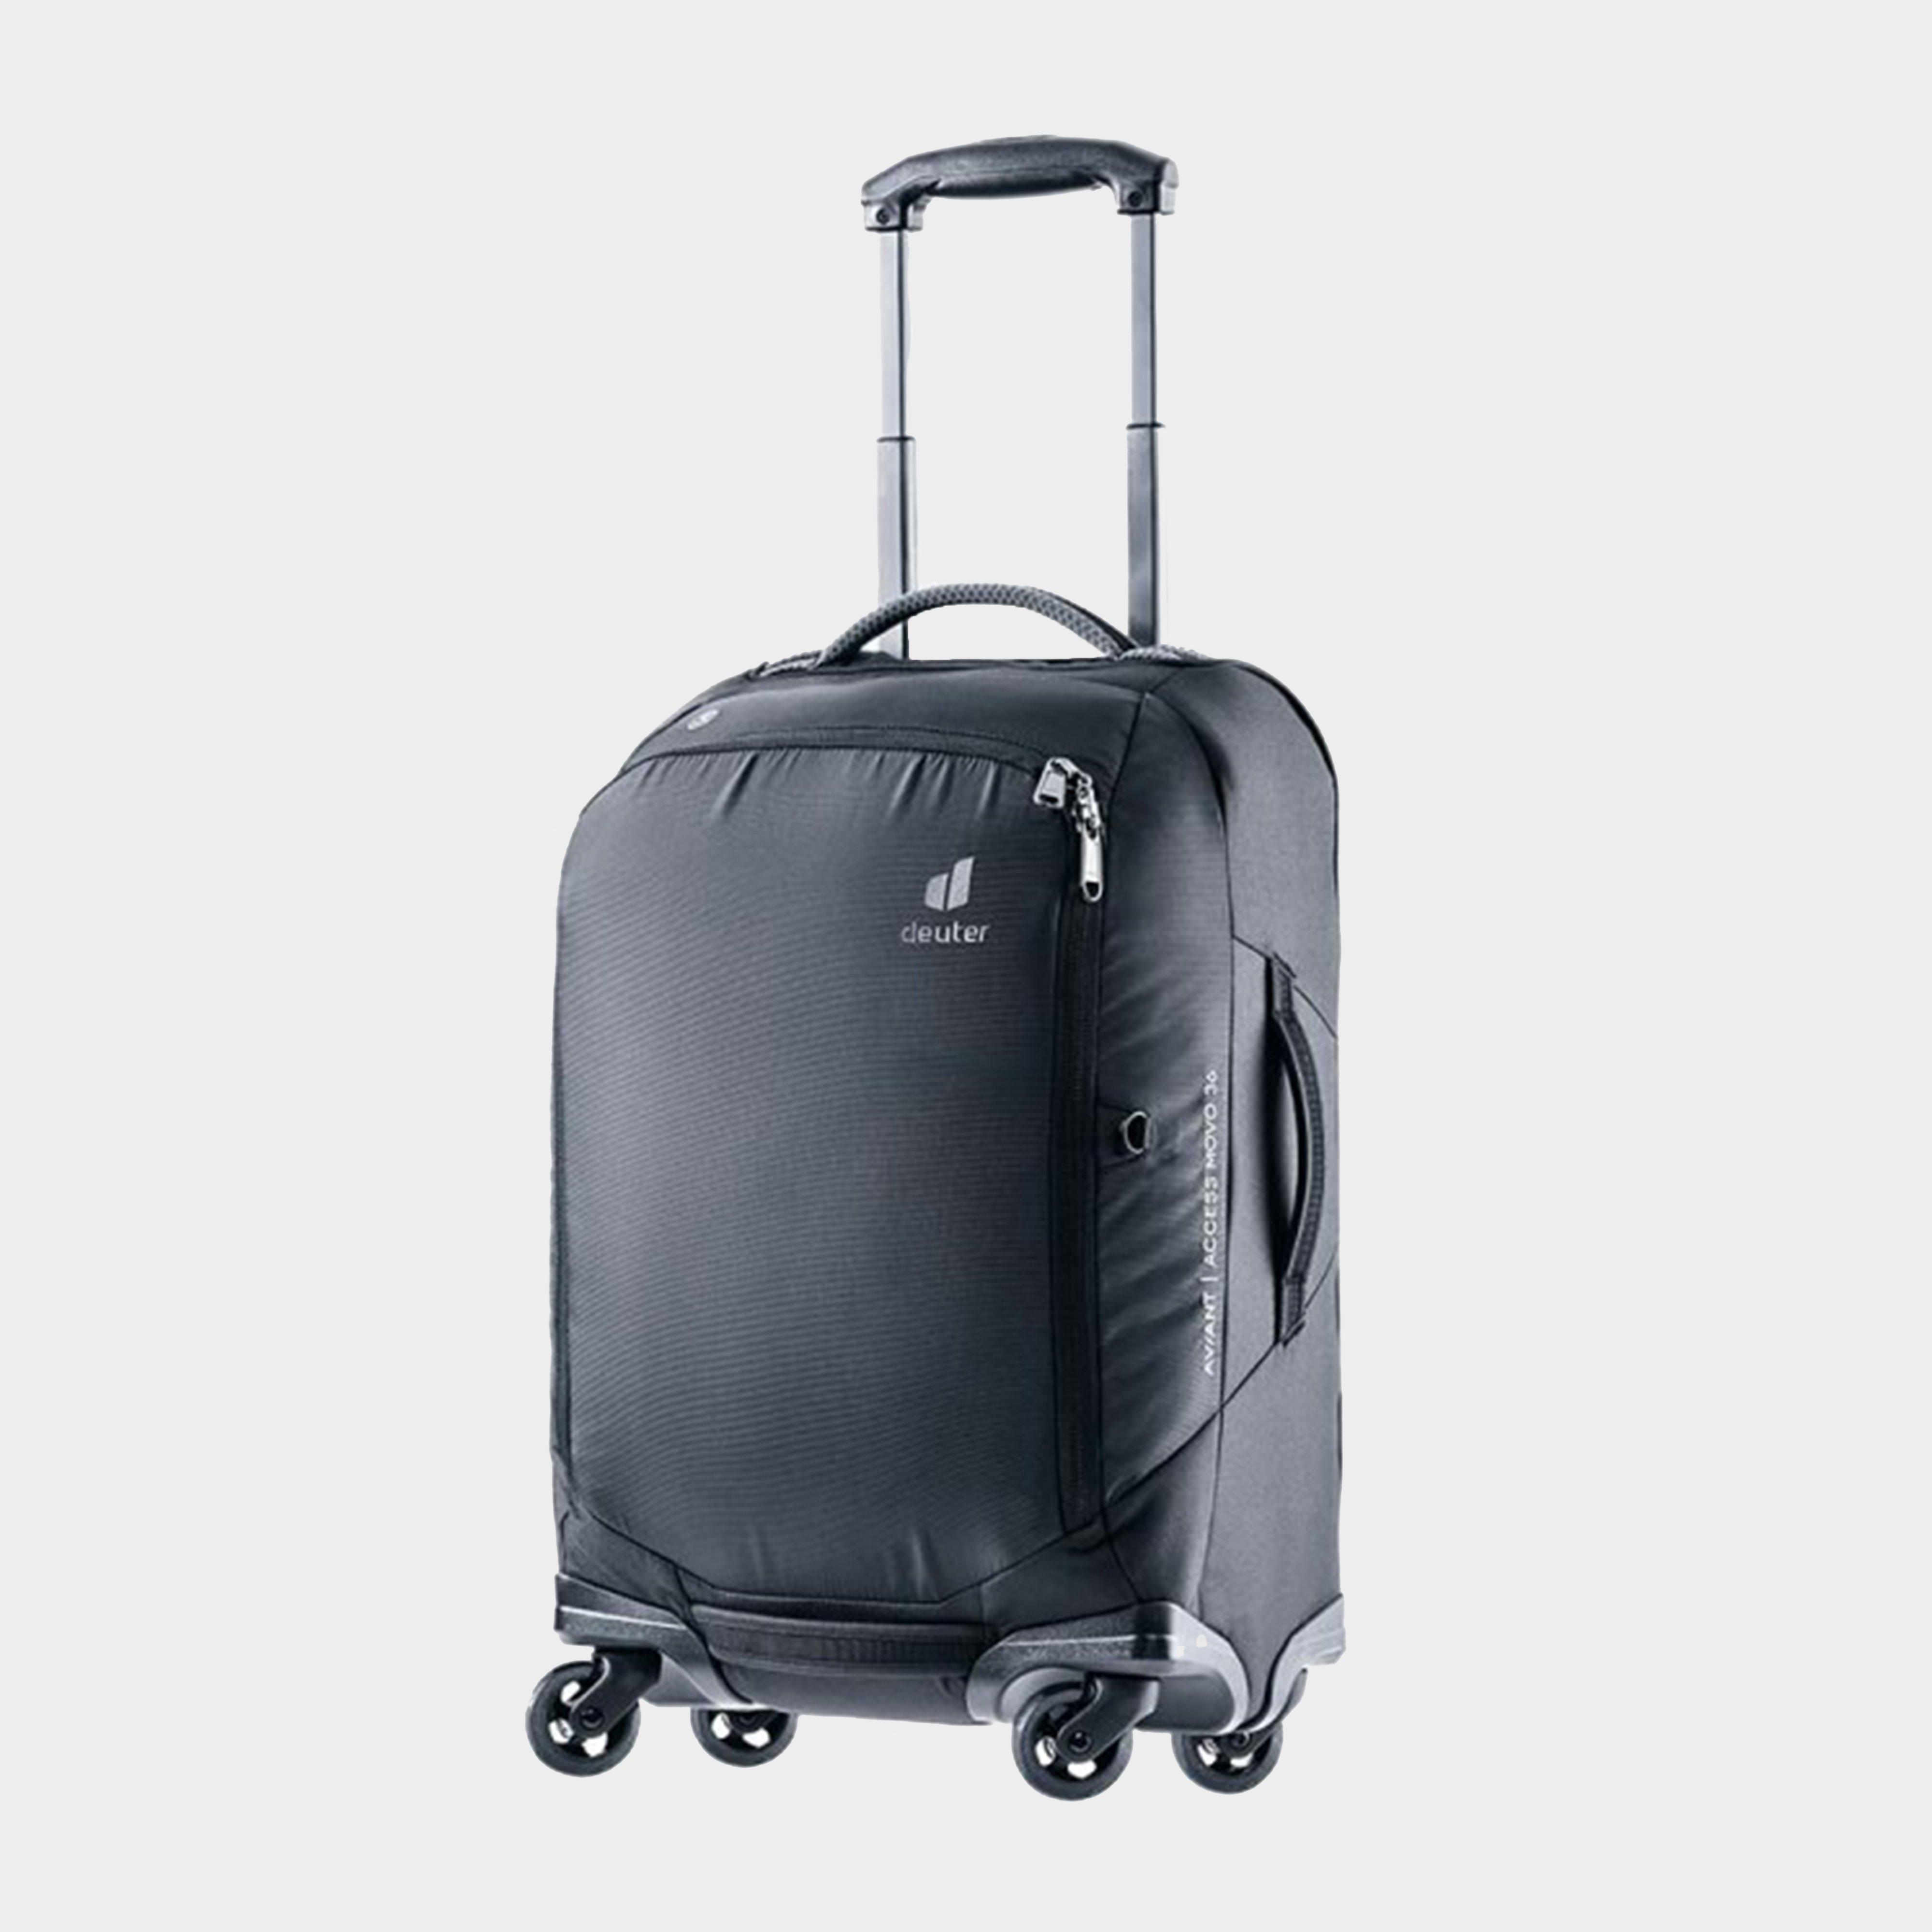  Deuter Aviant Access Movo 36 Wheeled Luggage, Grey